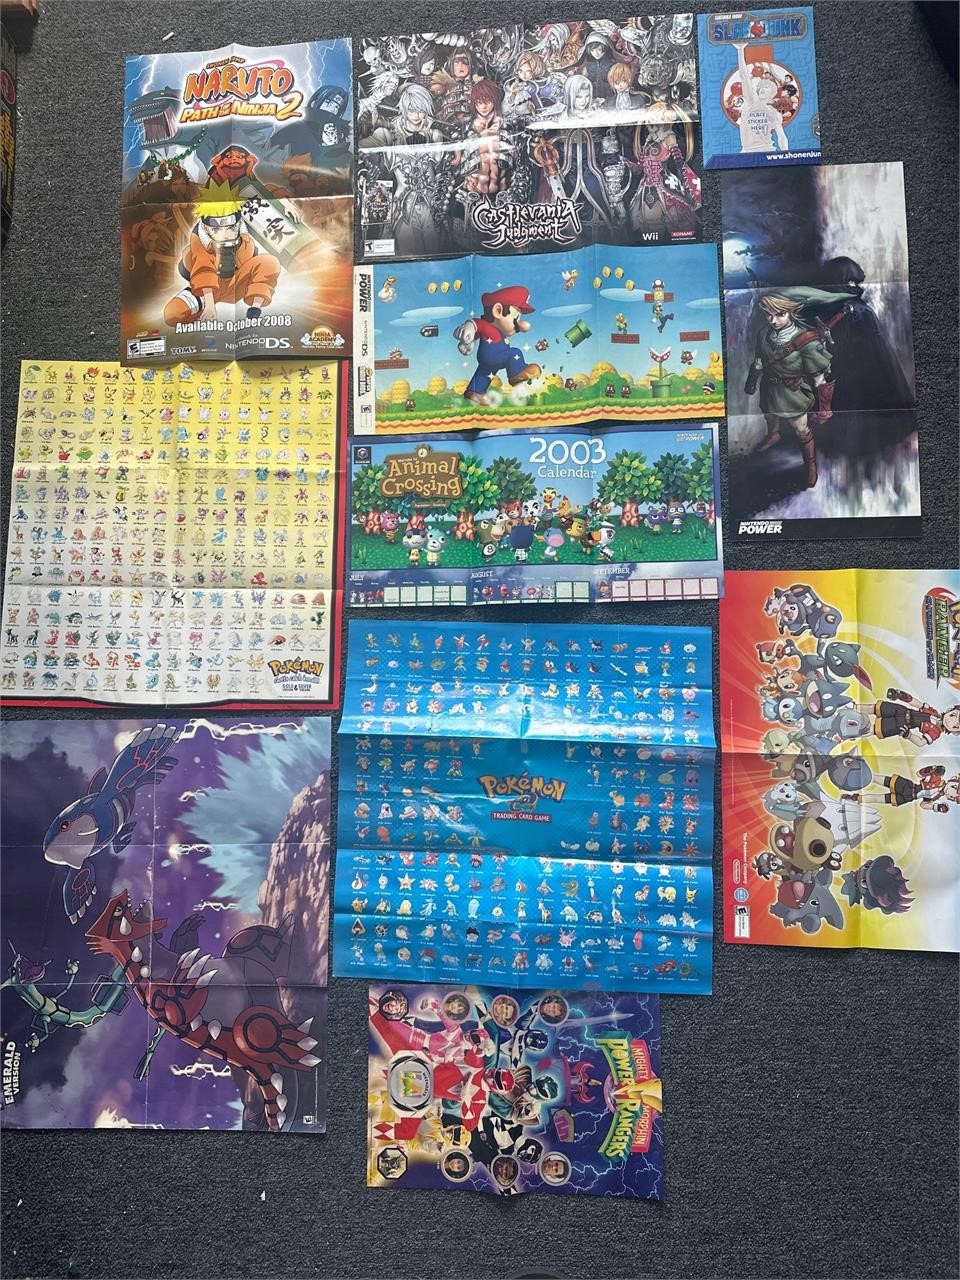 Pokémon Nintendo and other promo posters